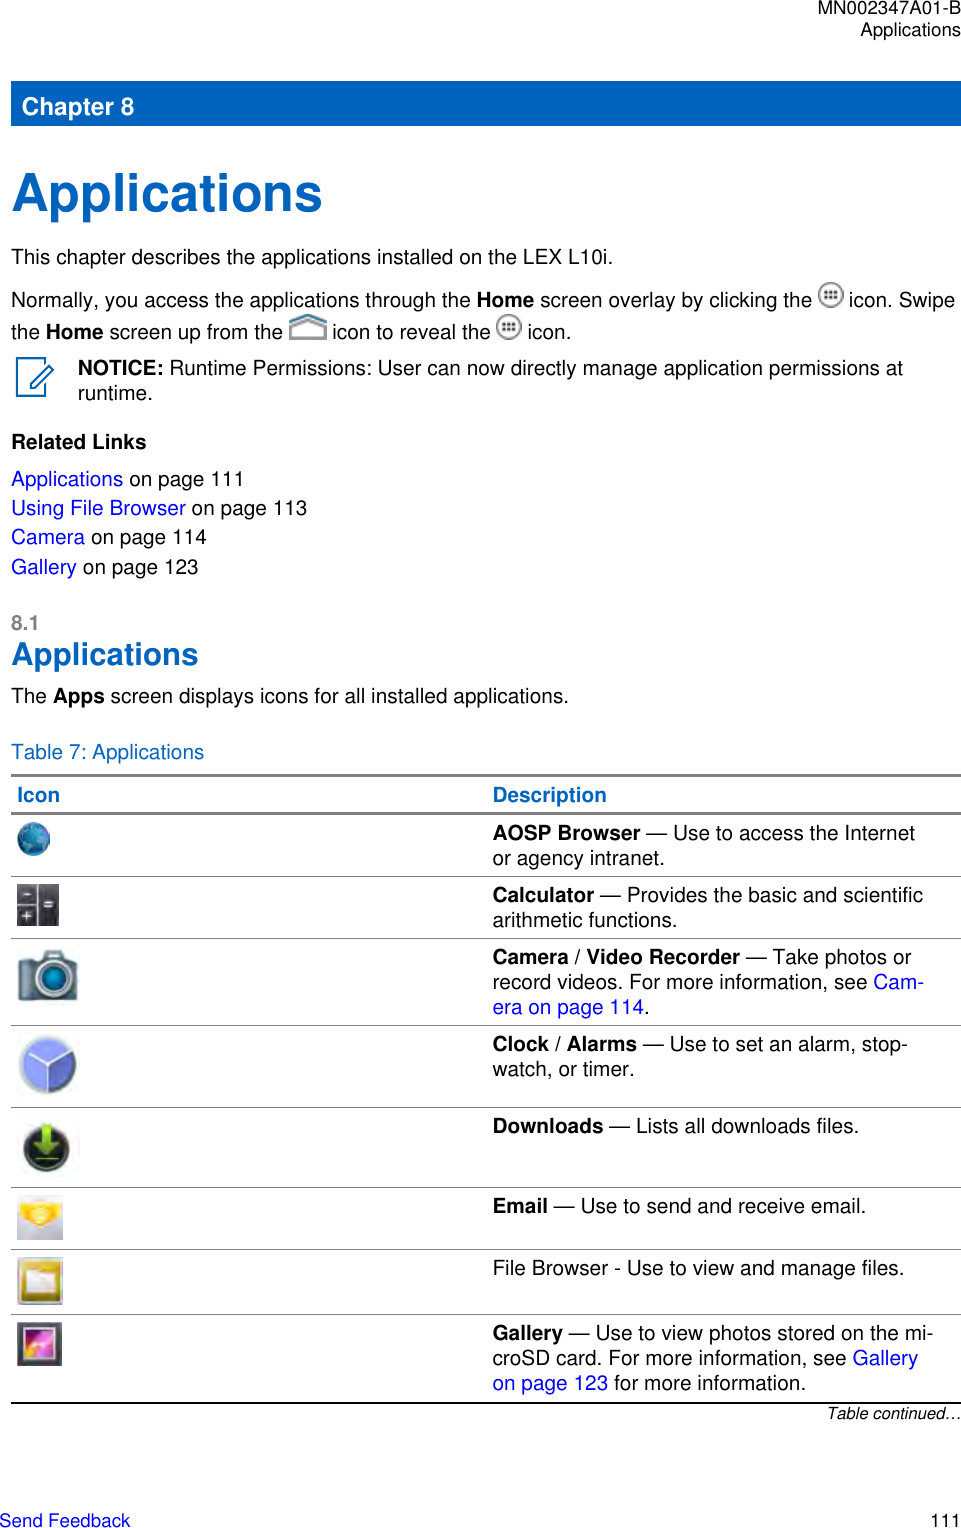 Chapter 8ApplicationsThis chapter describes the applications installed on the LEX L10i.Normally, you access the applications through the Home screen overlay by clicking the   icon. Swipethe Home screen up from the   icon to reveal the   icon.NOTICE: Runtime Permissions: User can now directly manage application permissions atruntime.Related LinksApplications on page 111Using File Browser on page 113Camera on page 114Gallery on page 1238.1ApplicationsThe Apps screen displays icons for all installed applications.Table 7: ApplicationsIcon DescriptionAOSP Browser — Use to access the Internetor agency intranet.Calculator — Provides the basic and scientificarithmetic functions.Camera / Video Recorder — Take photos orrecord videos. For more information, see Cam-era on page 114.Clock / Alarms — Use to set an alarm, stop-watch, or timer.Downloads — Lists all downloads files.Email — Use to send and receive email.File Browser - Use to view and manage files.Gallery — Use to view photos stored on the mi-croSD card. For more information, see Galleryon page 123 for more information.Table continued…MN002347A01-BApplicationsSend Feedback   111